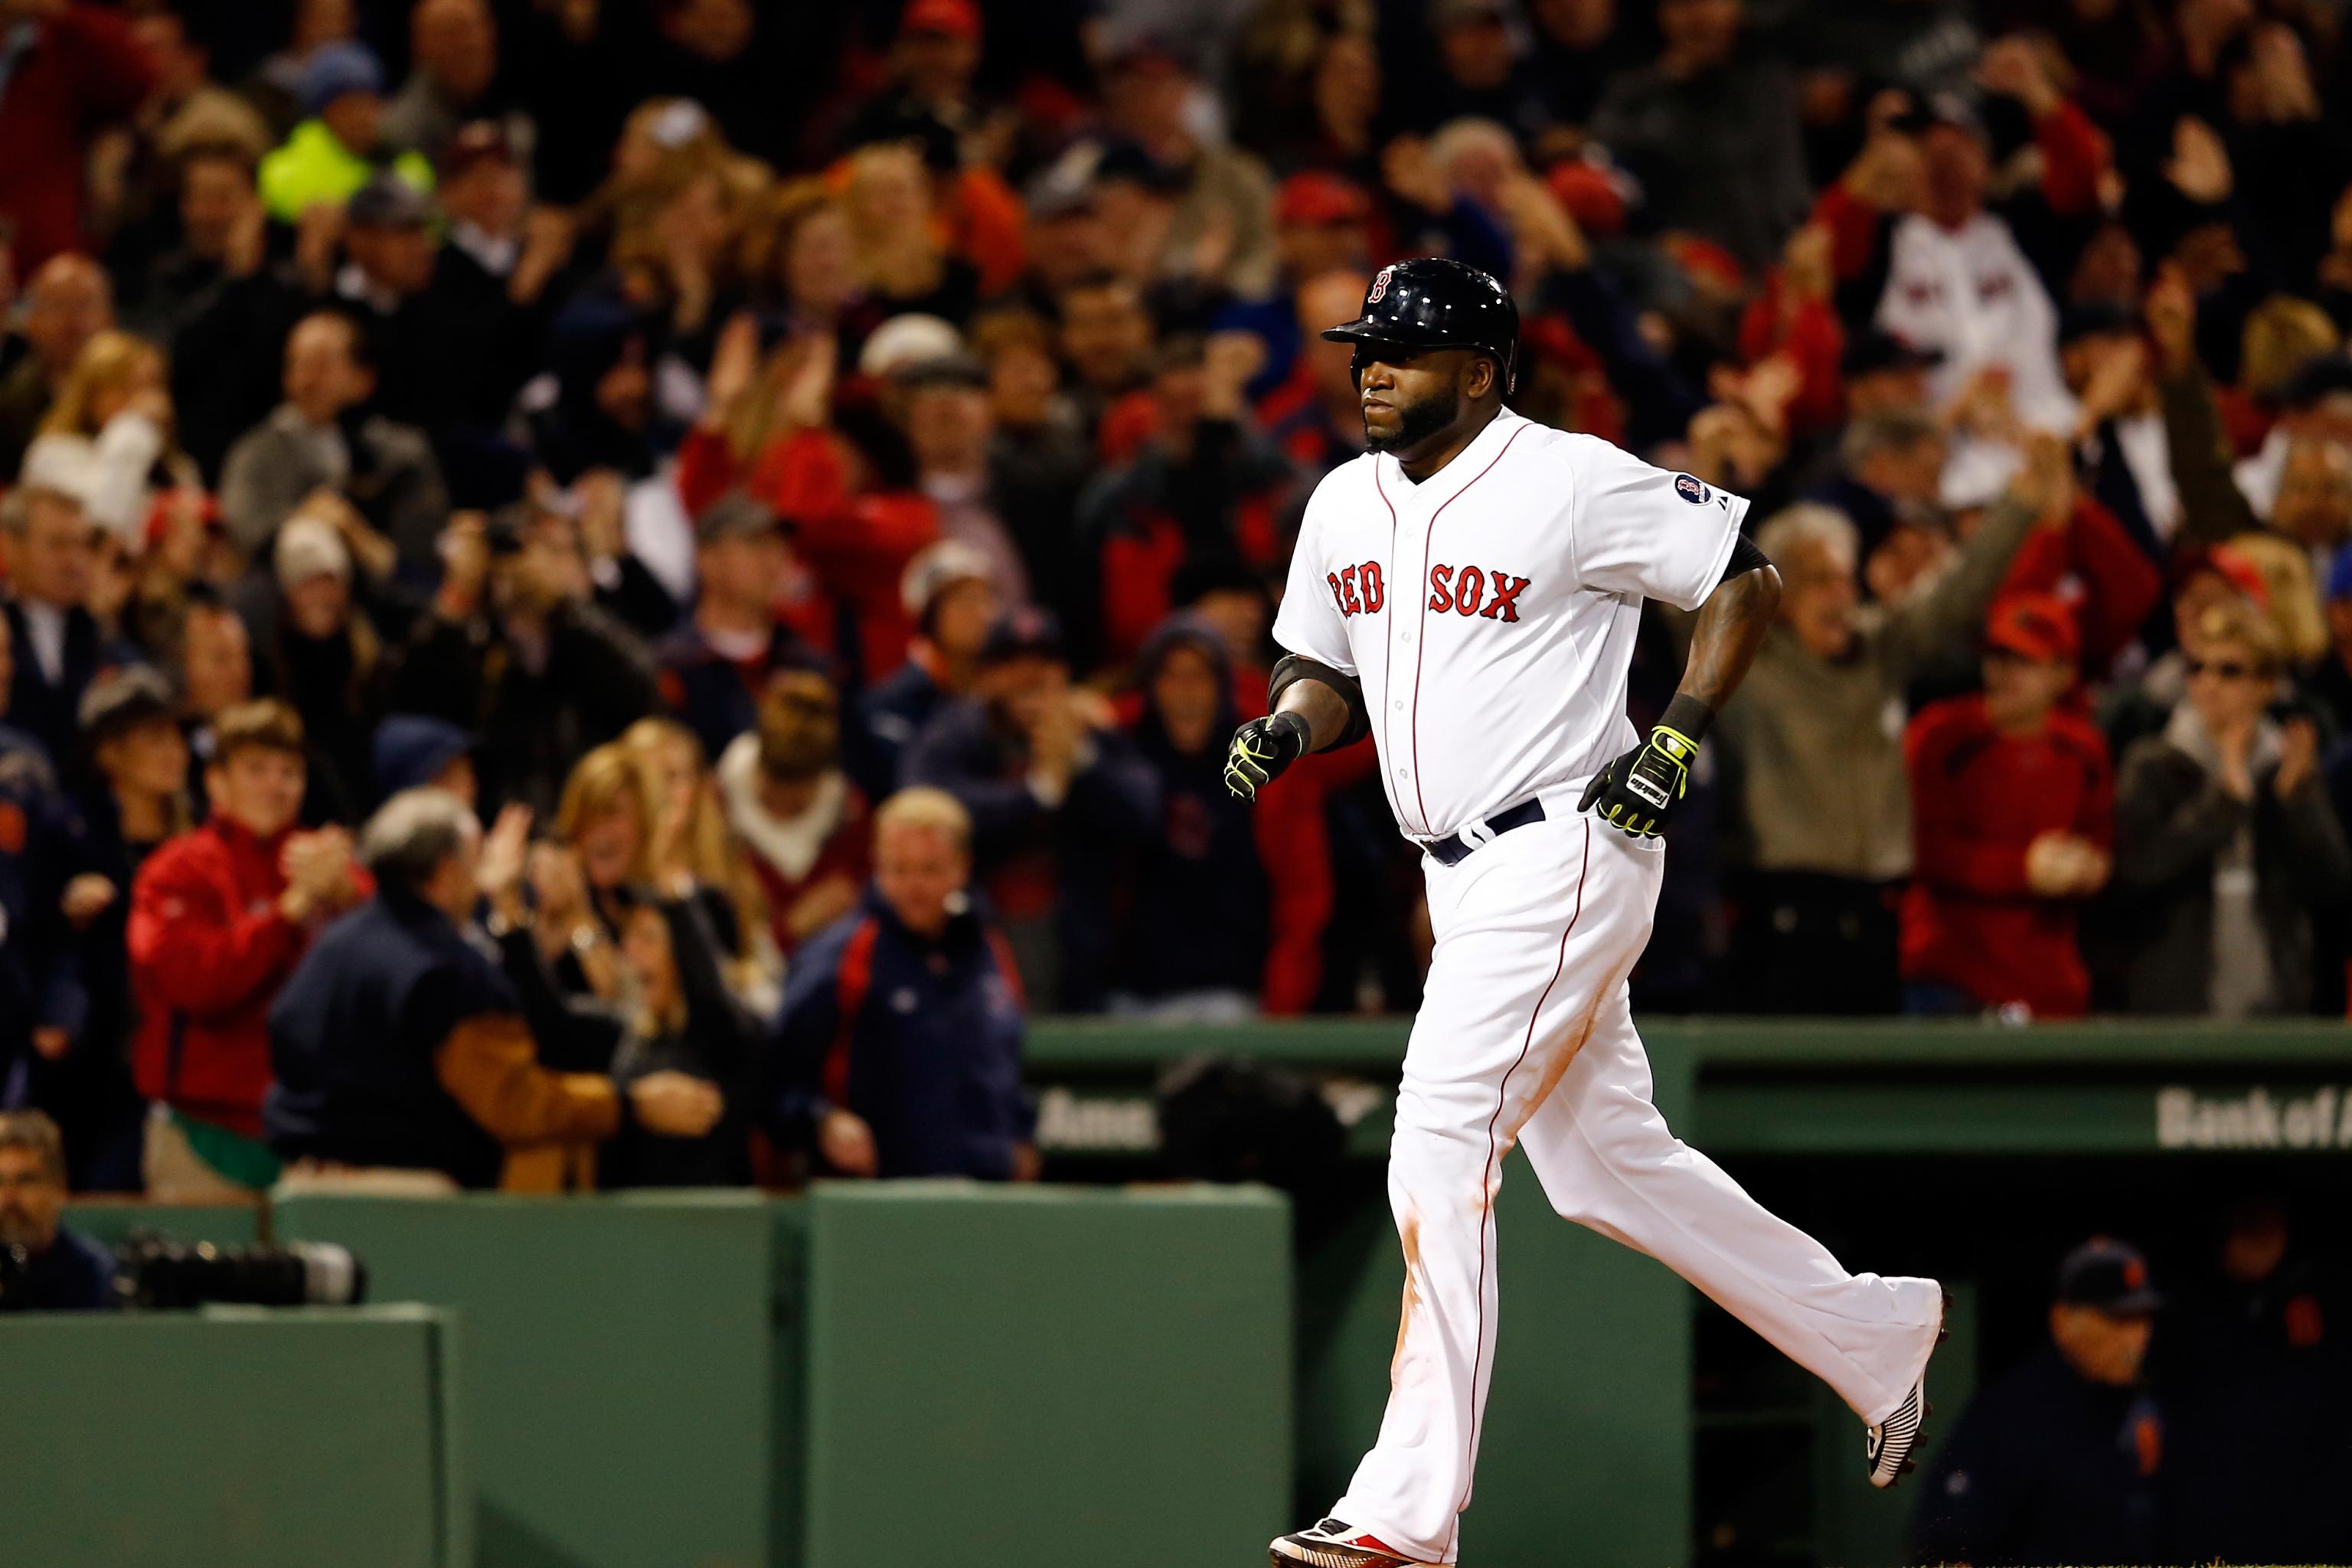 MLB on X: David Ortiz became a legend in Boston by leading the Red Sox to  3 World Series titles. He was MVP of the 2004 ALCS and 2013 World Series. “ Big